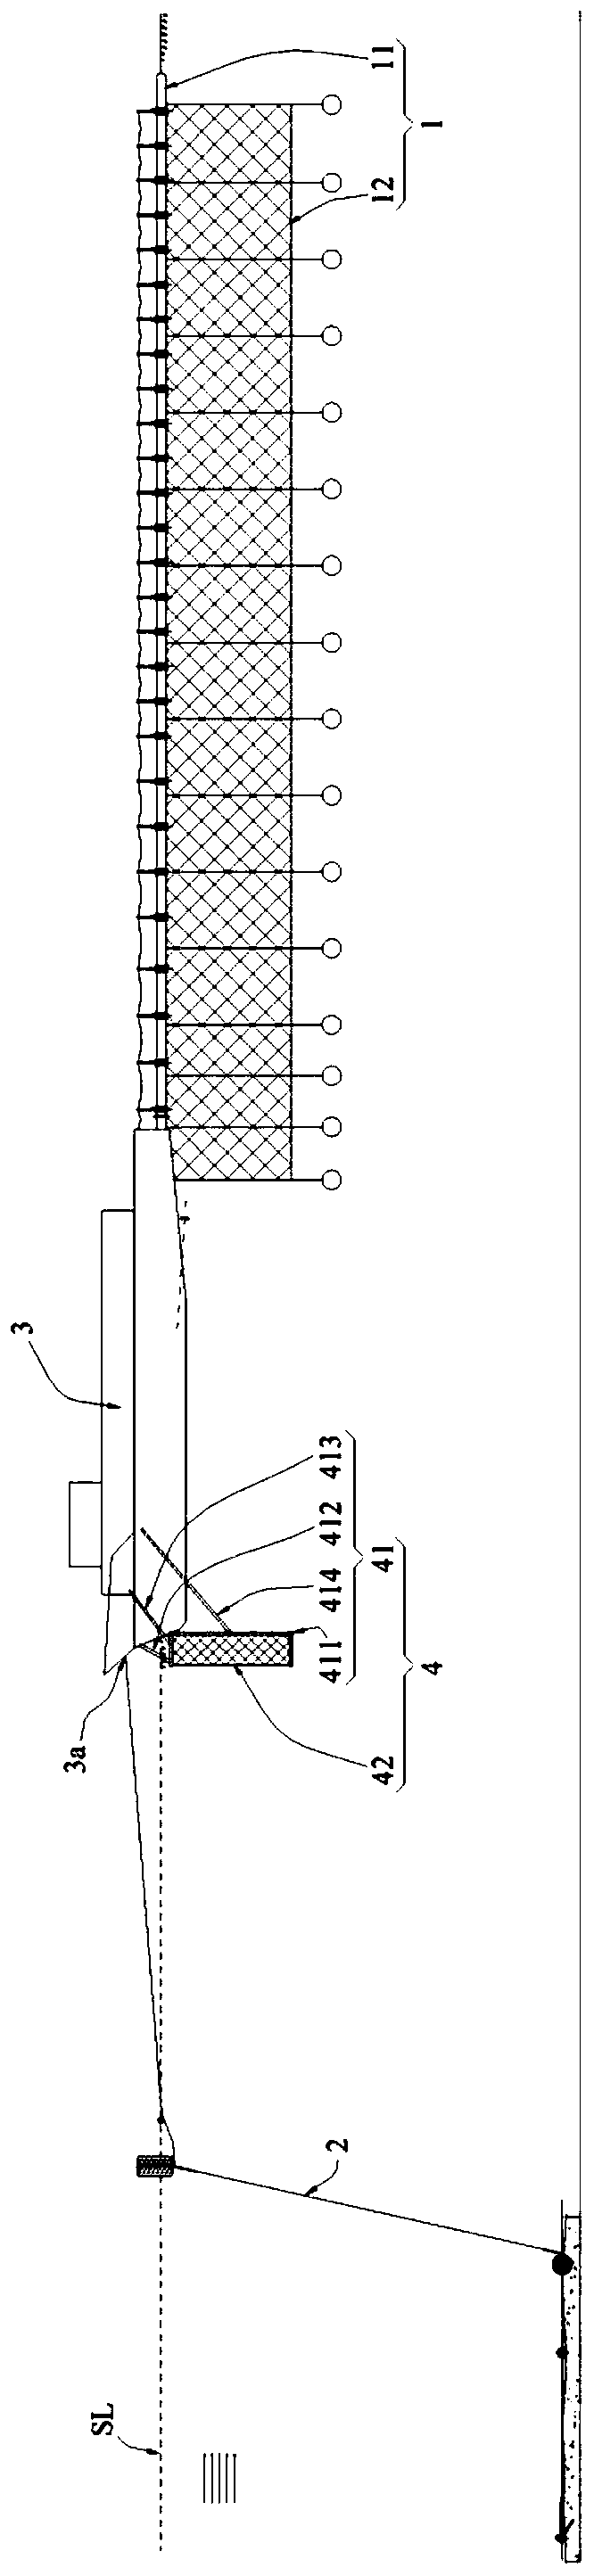 Integrated symmetrical airfoil deep-water cage culture system